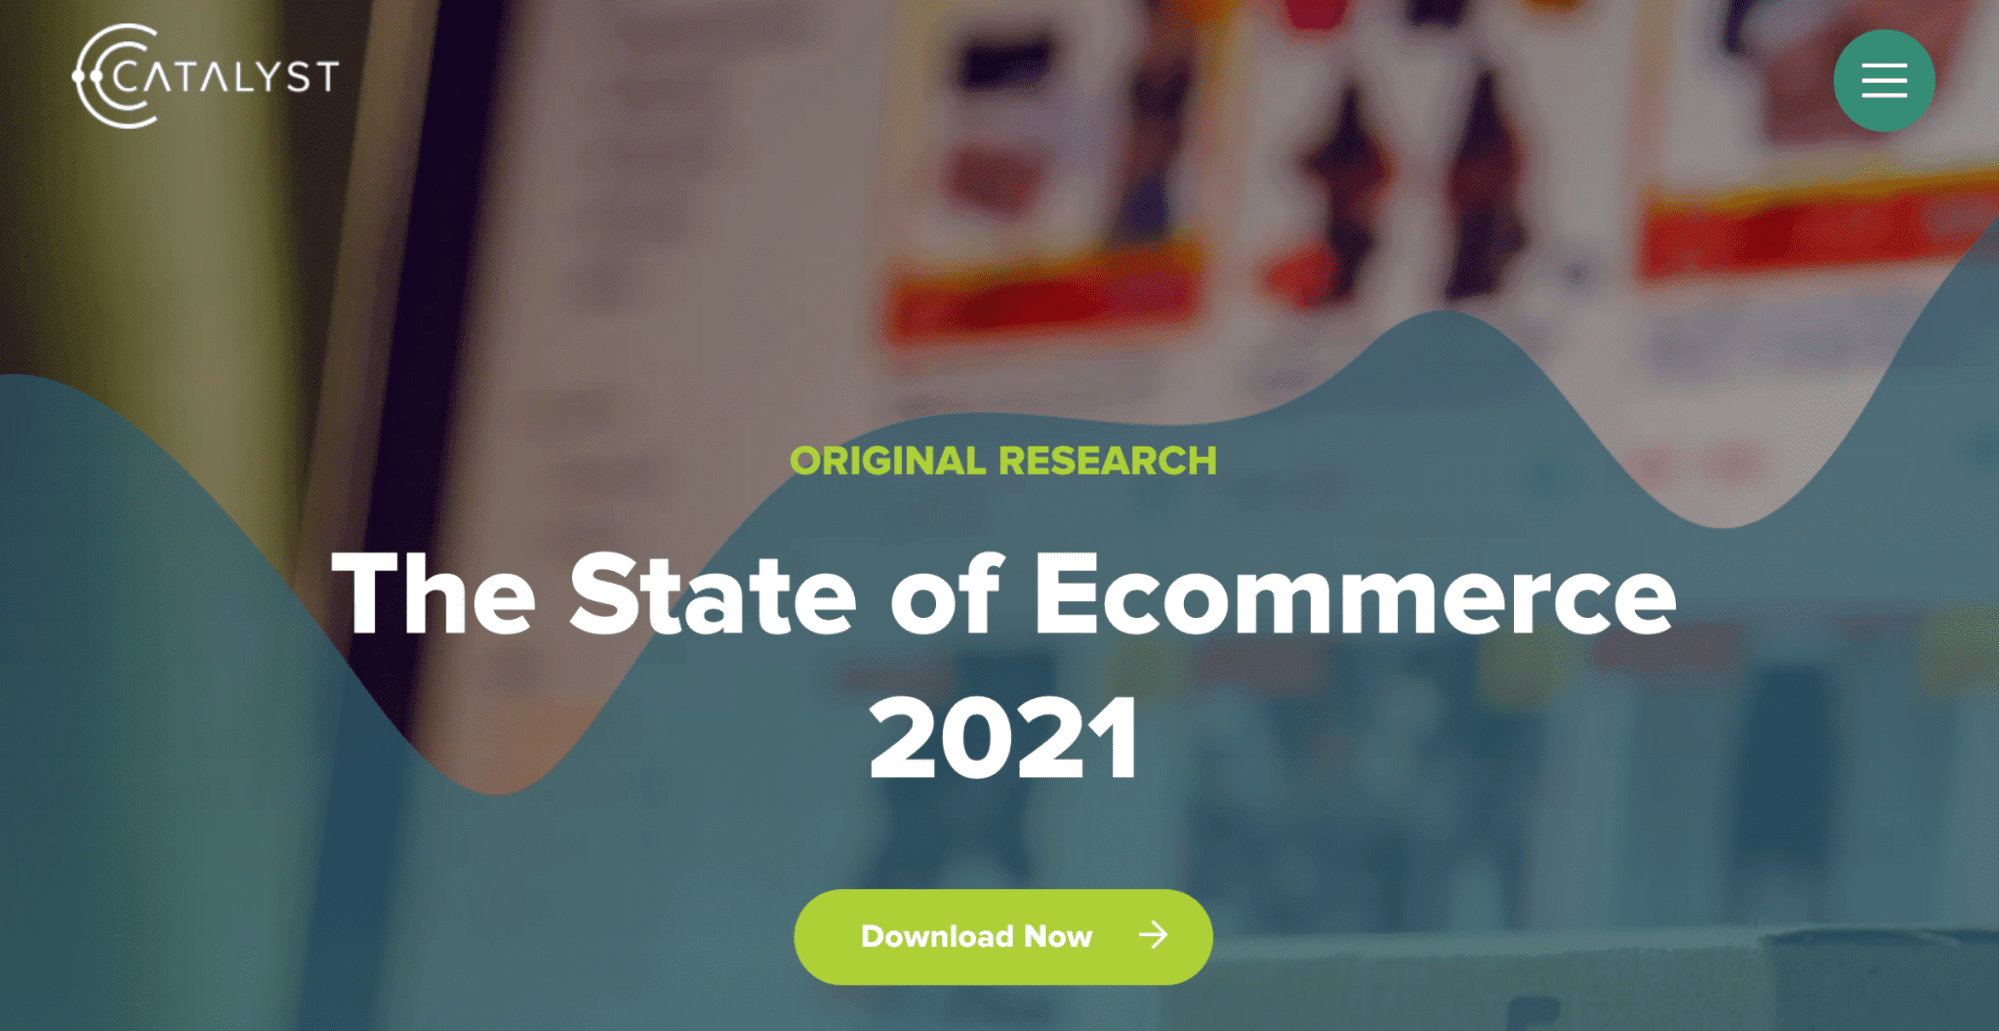 "State of Ecommerce" content example